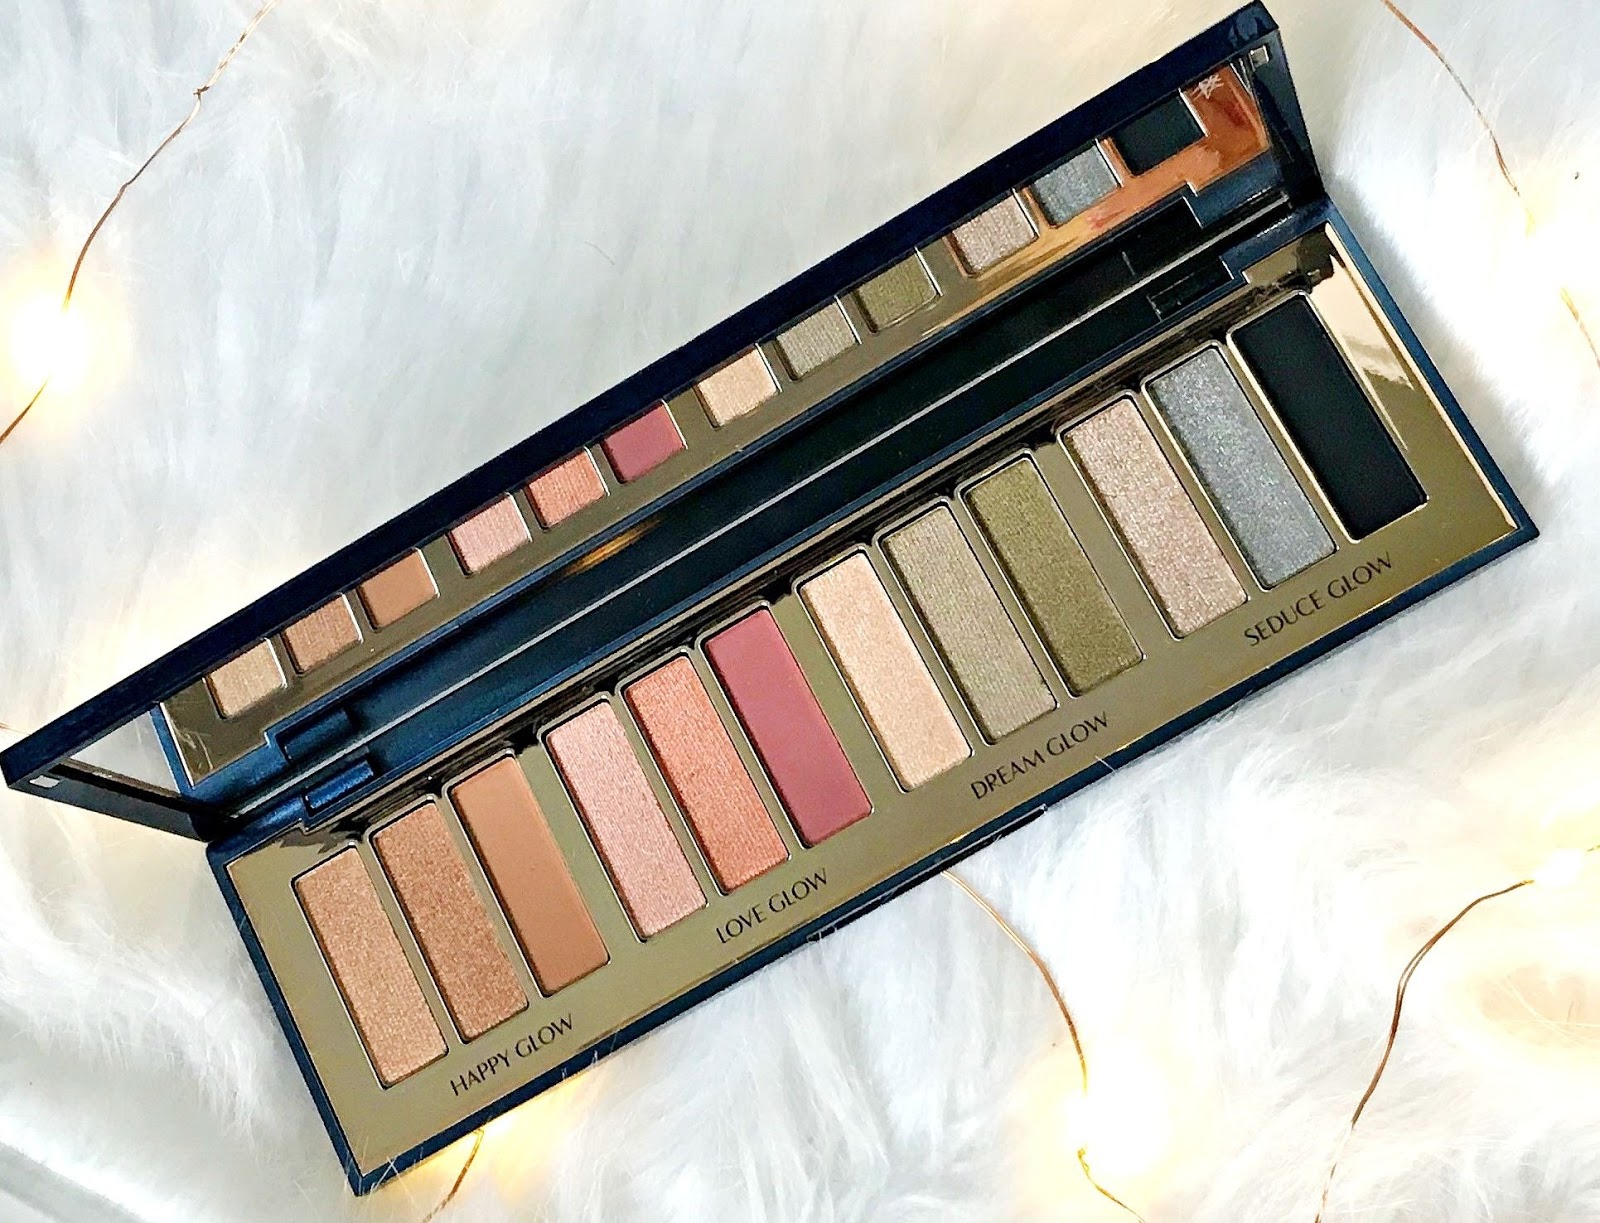 Charlotte Tilbury Starry Eyes To Mesmerise Palette Review & Swatches